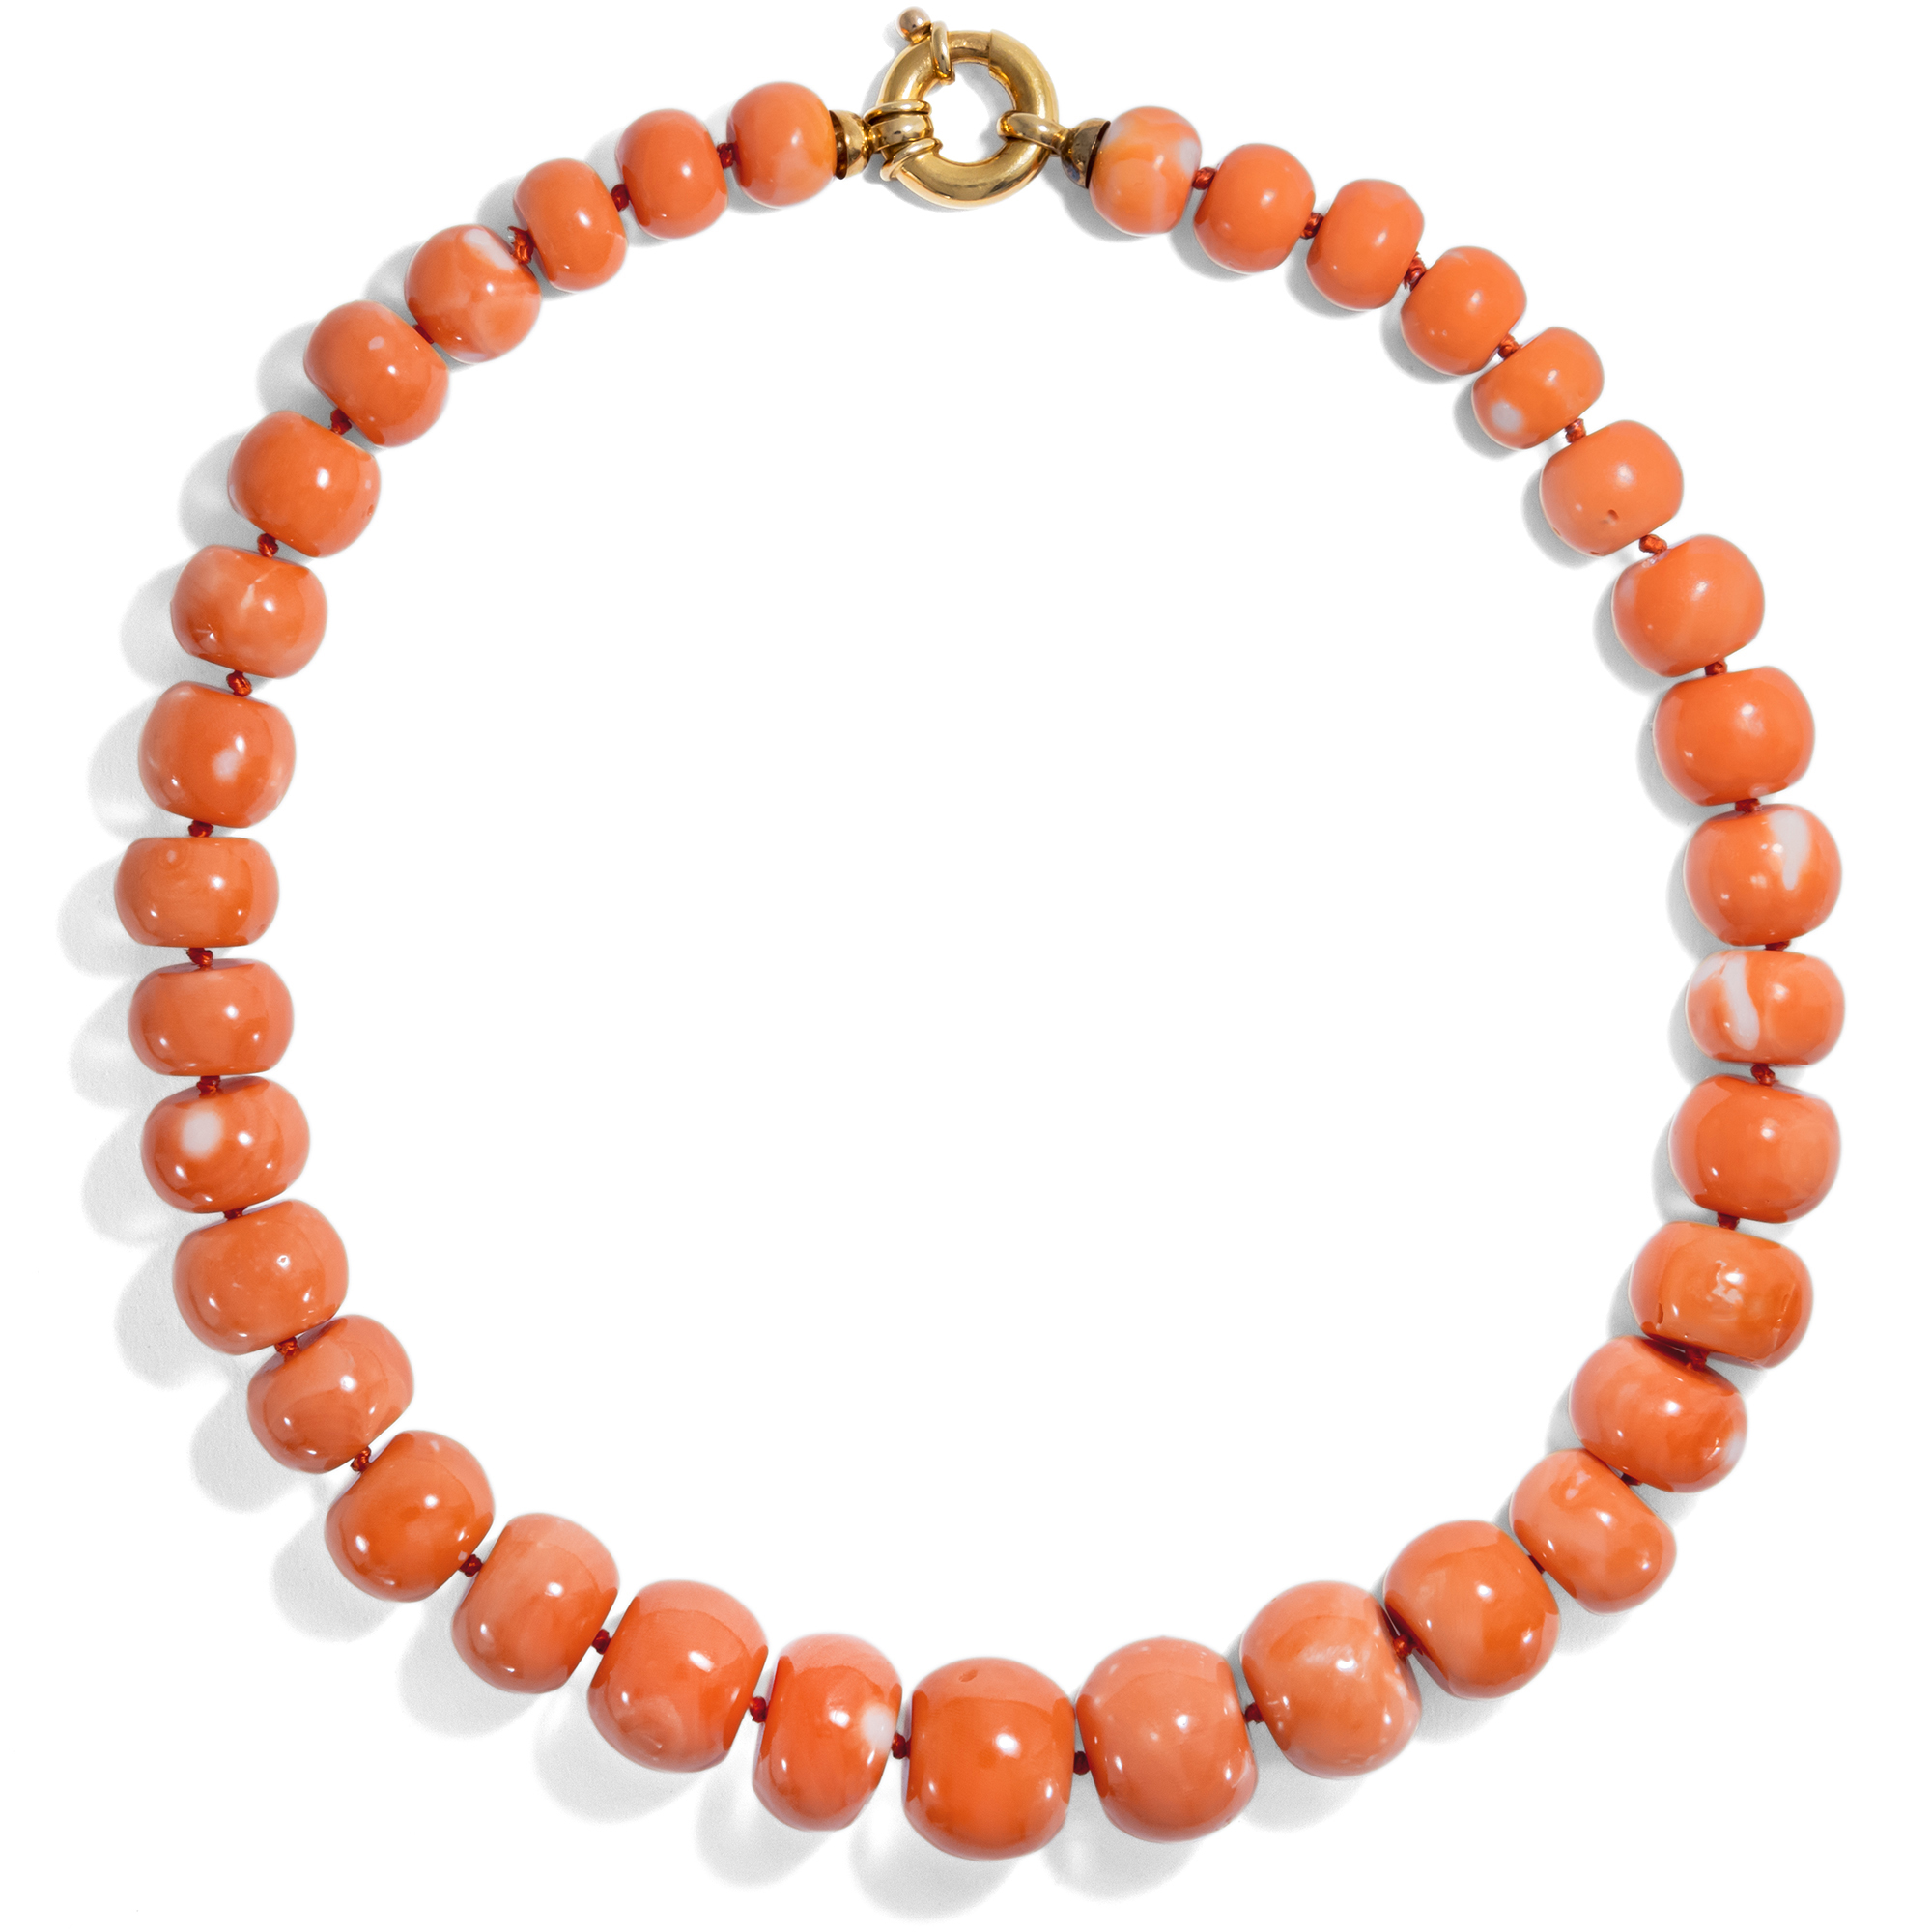 Magnificent Vintage Choker Made of Deep Sea Coral, Italy ca. 1985